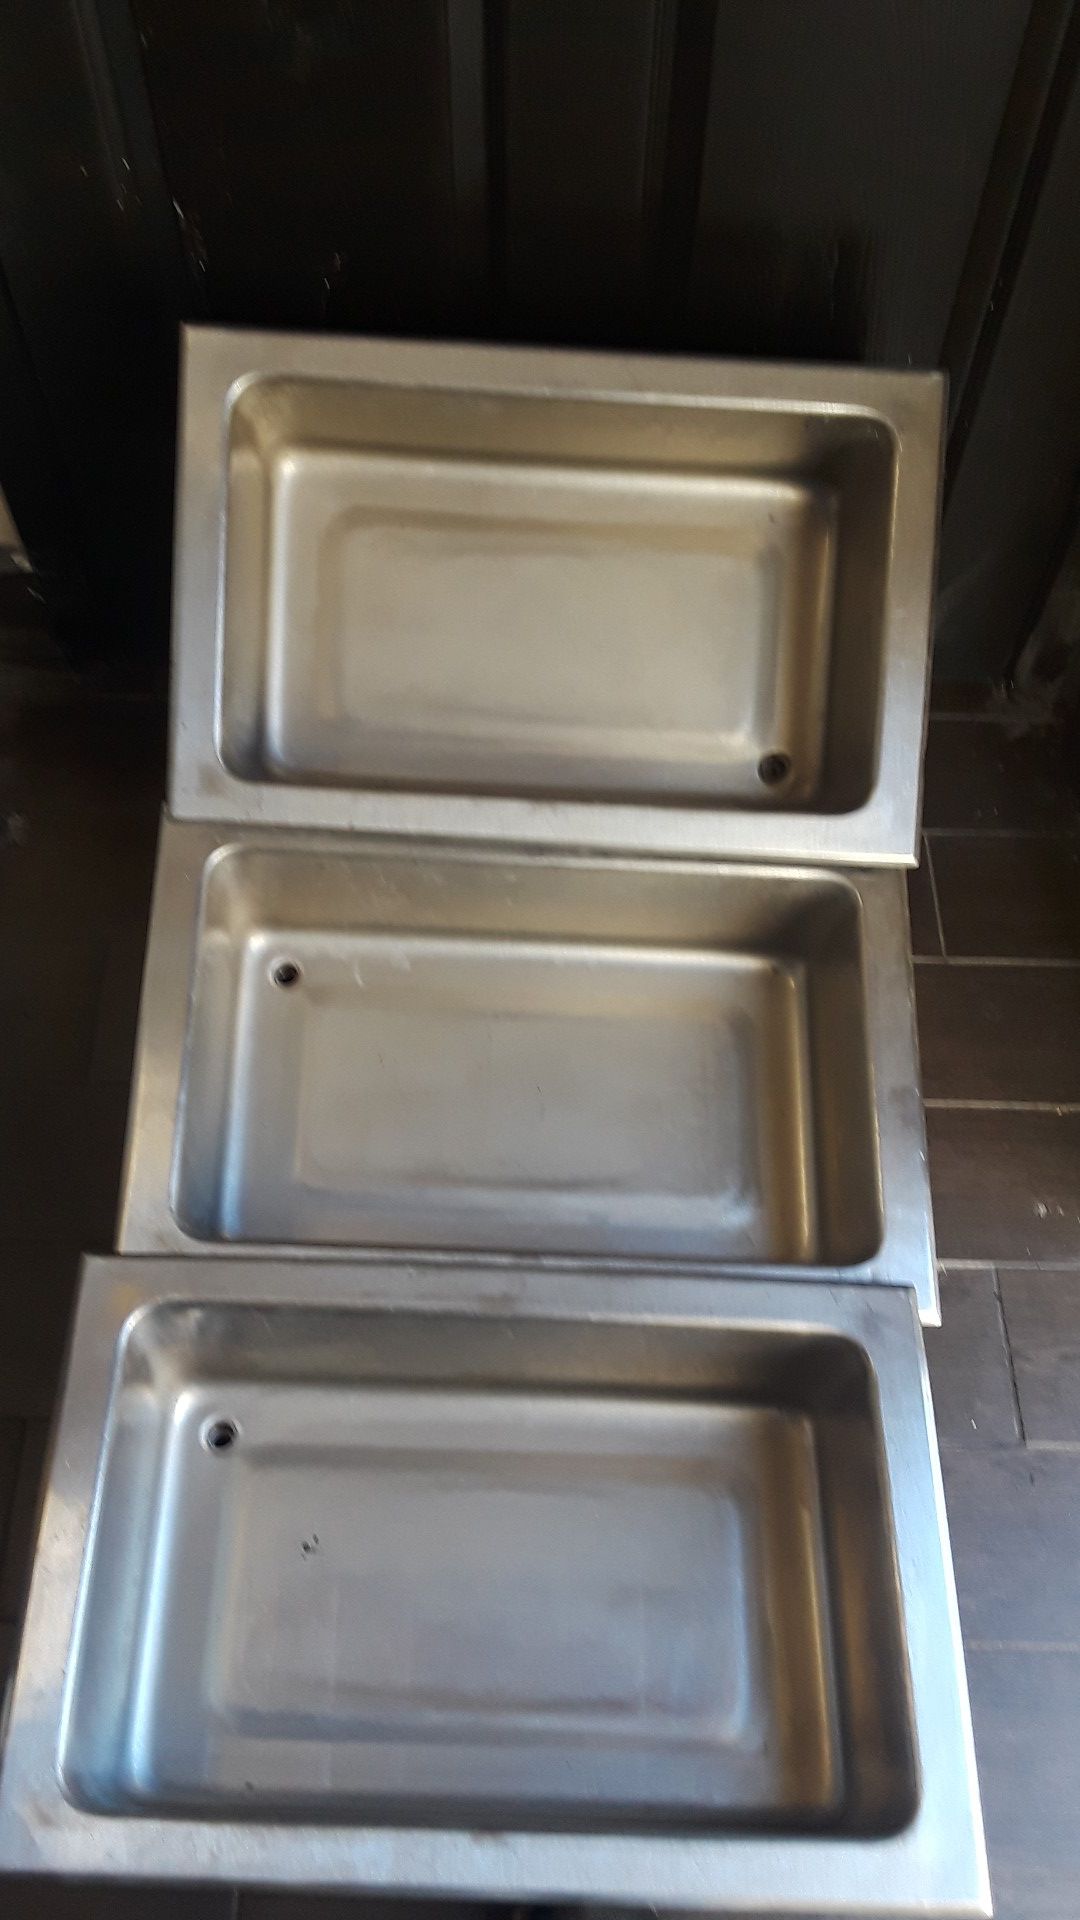 Restaurant ice box for cooling items total of three